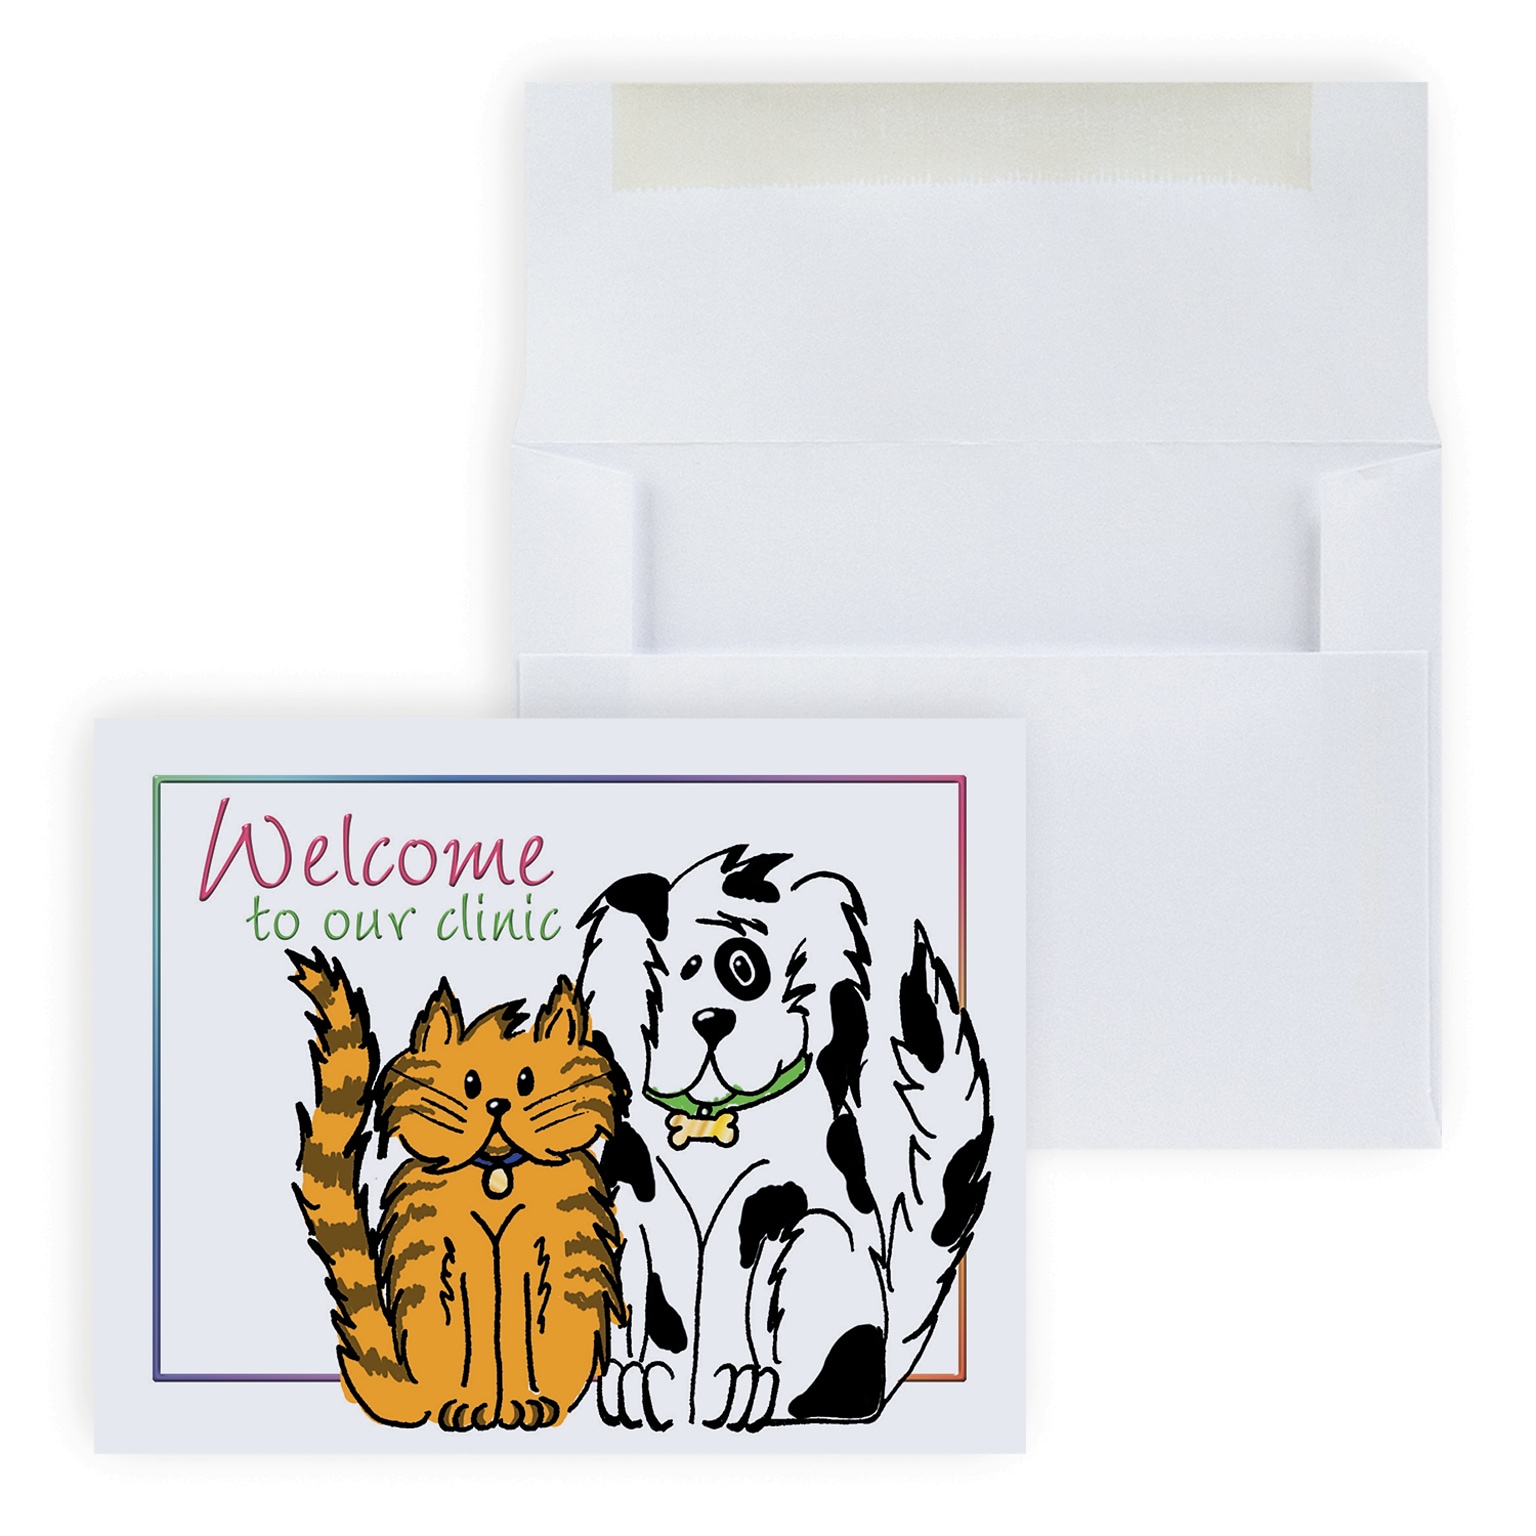 Custom Welcome Clinic Welcome Cards, With Envelopes, 5-3/8 x 4-1/4, 25 Cards per Set